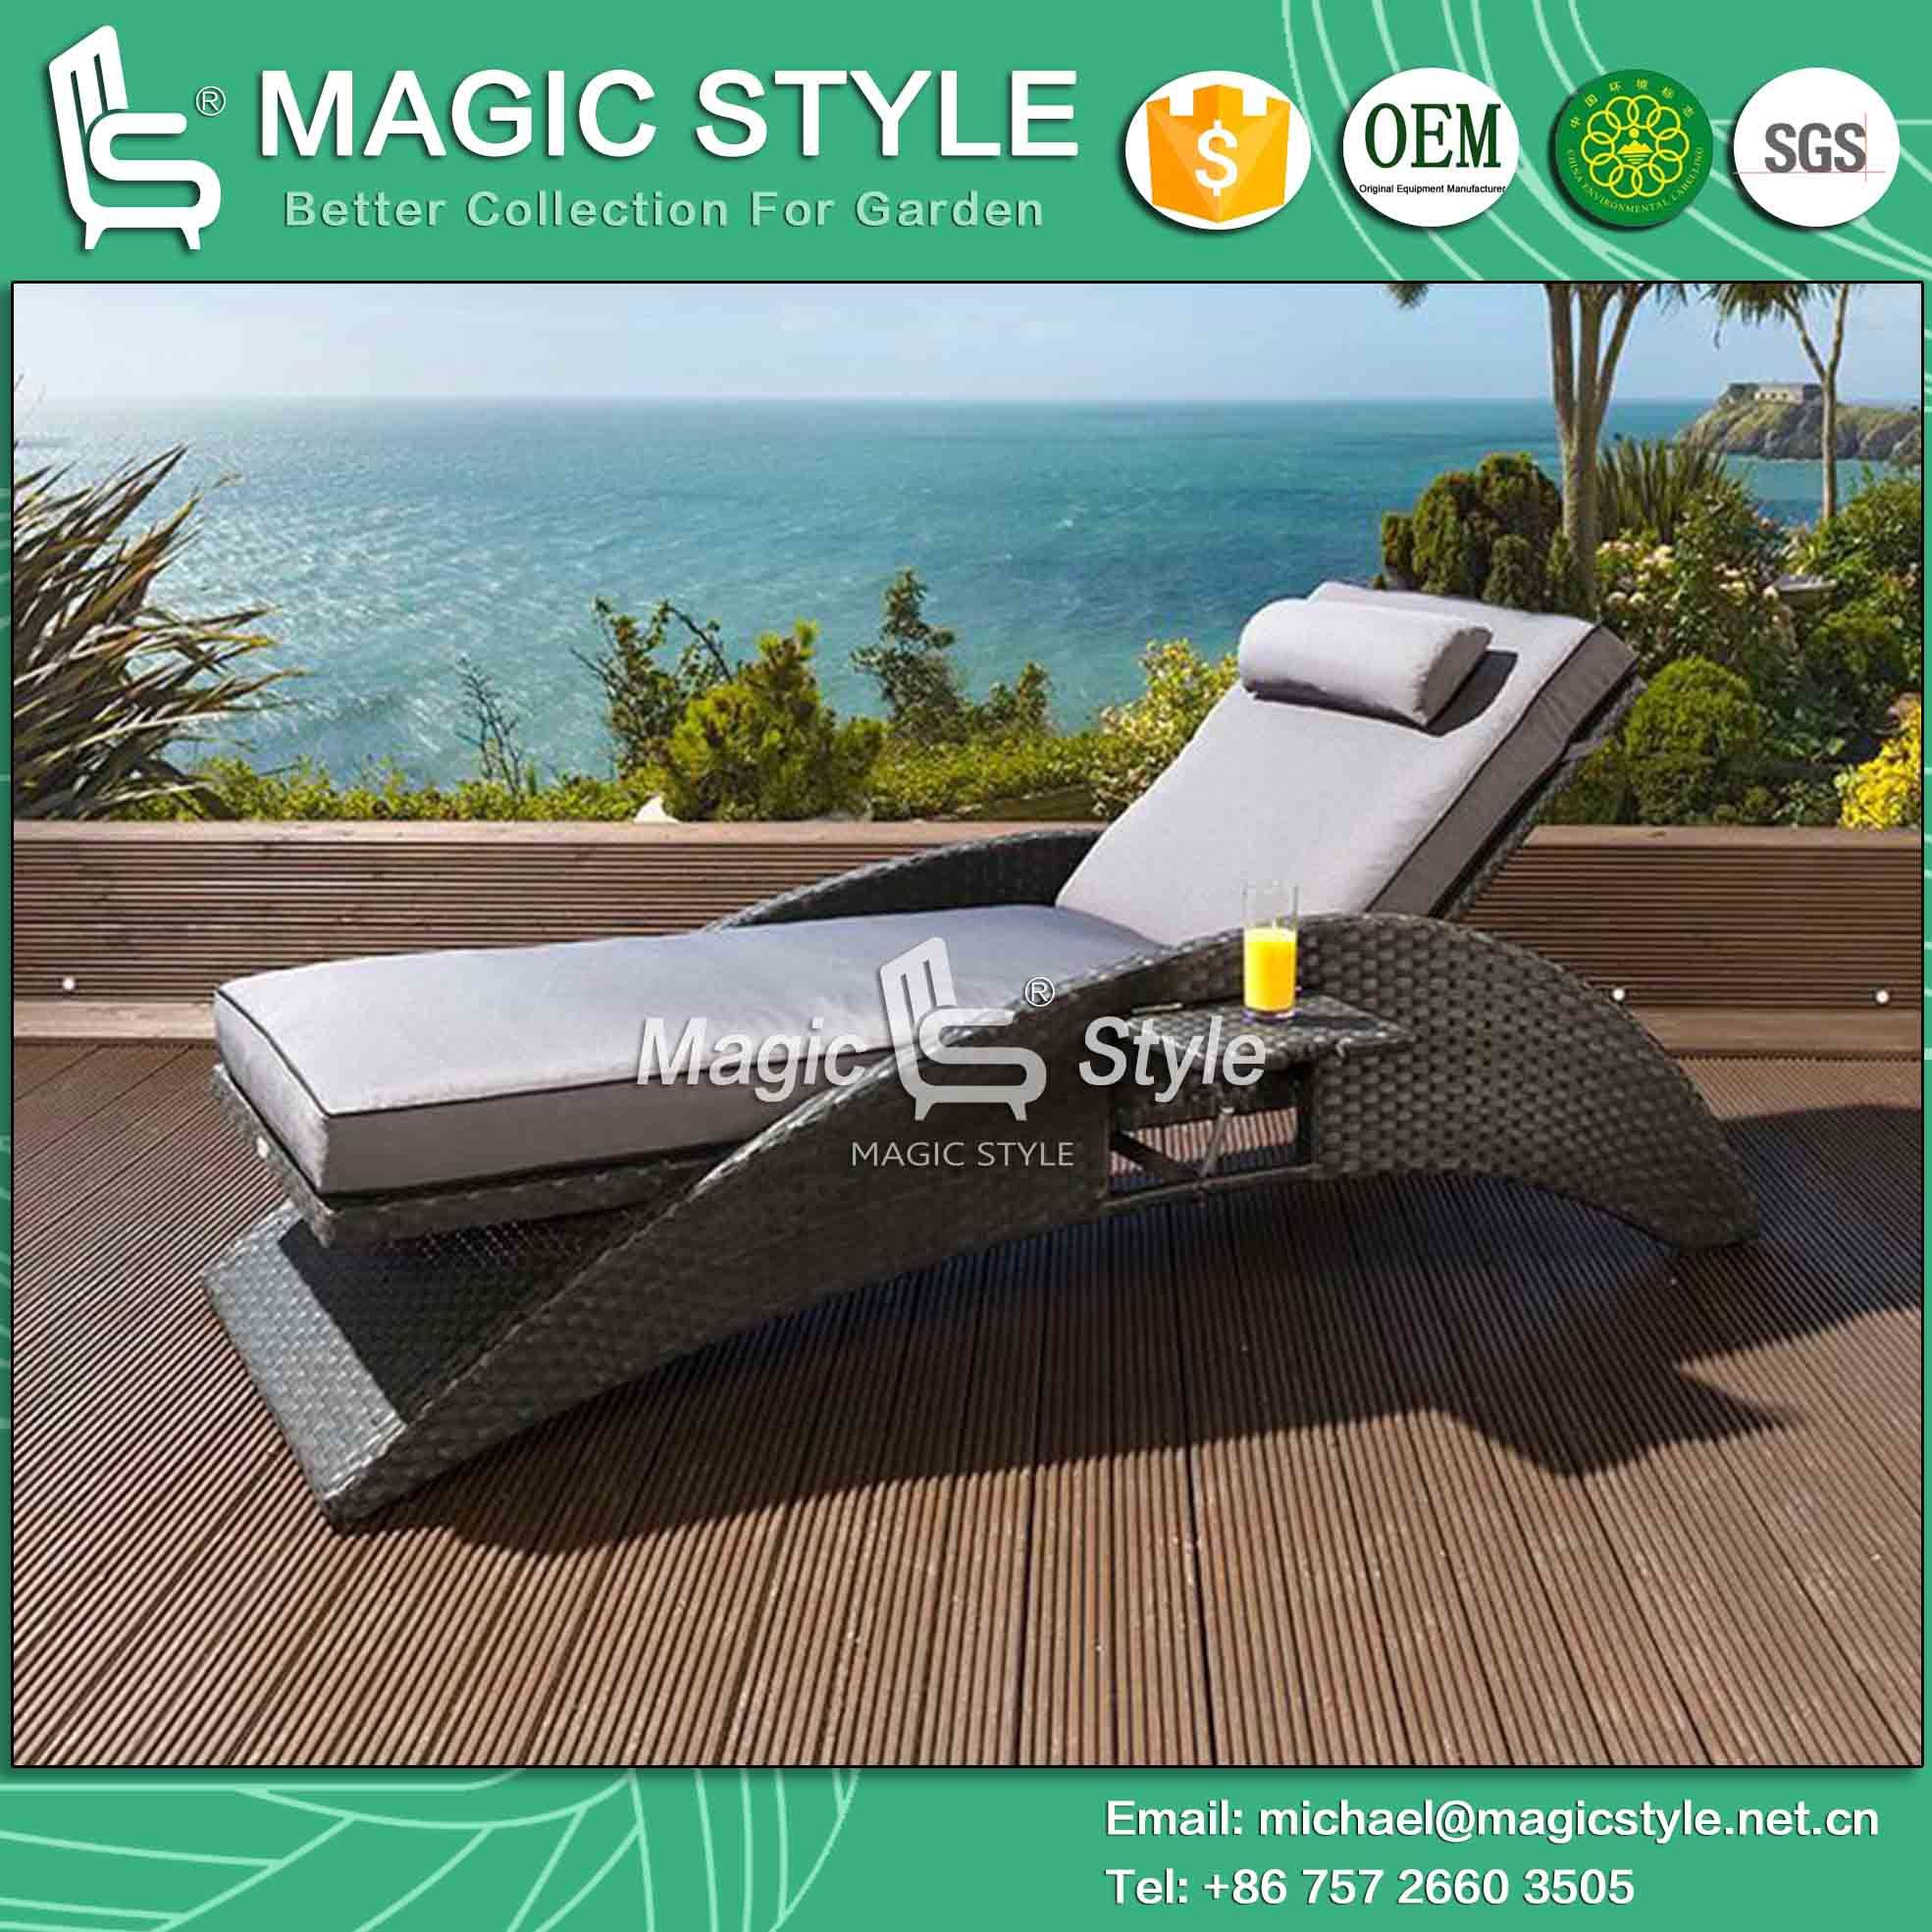 Rattan Sunlounger Wicker Sunlounger Outdoor Furniture Garden Furniture Patio Furniture Hotel Project Pool Daybed Modern Sun Bed Deck Daybed (Magic Style)